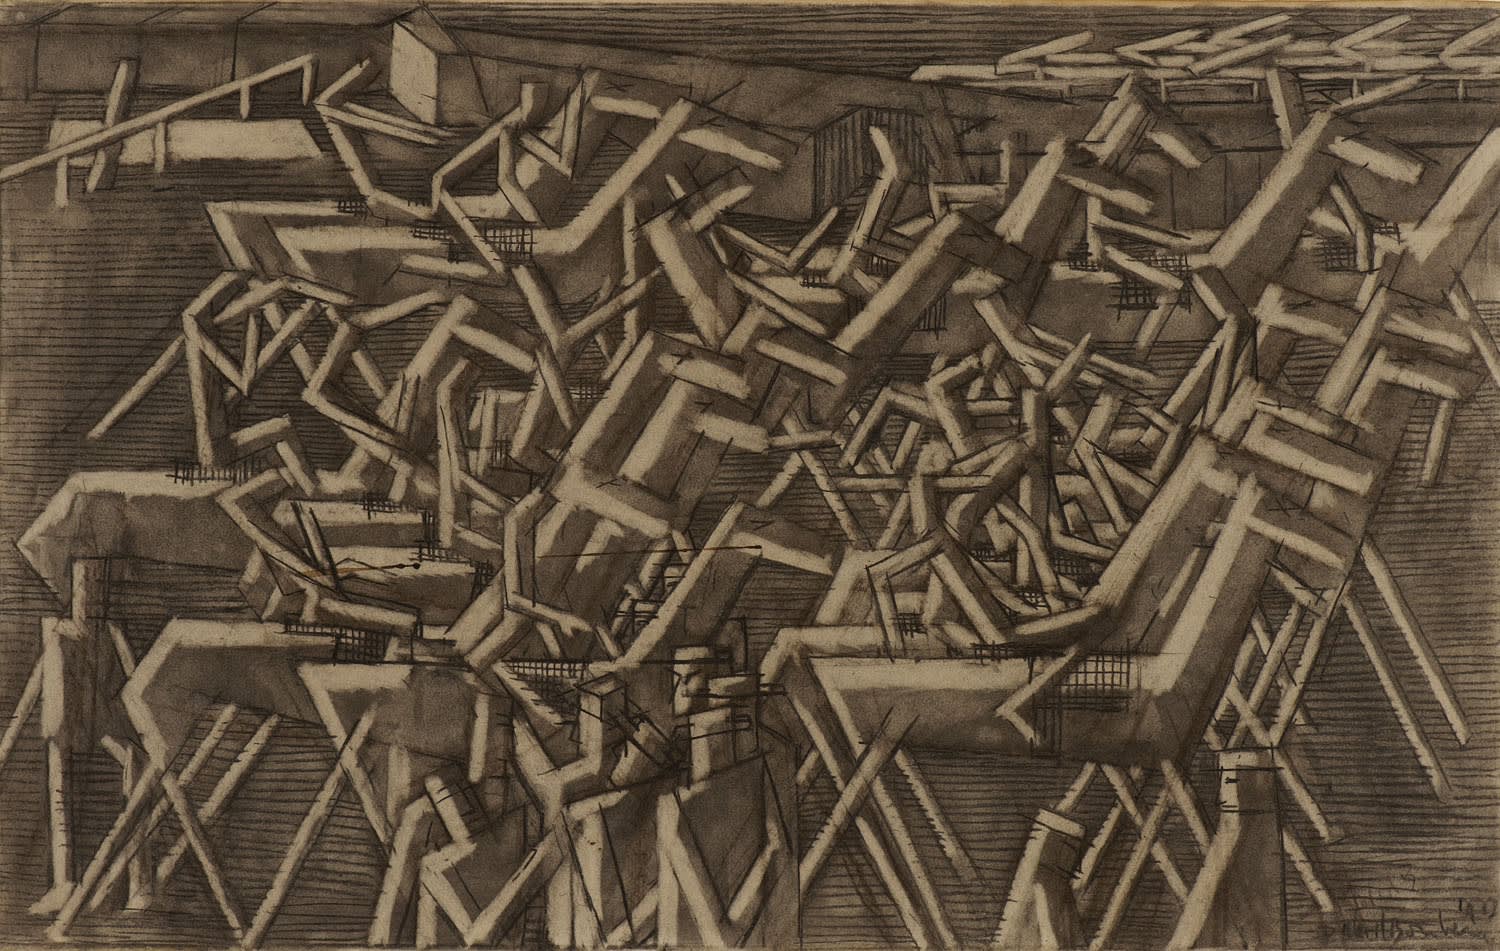 David Bomberg (1890-1957) Racehorses 1913 Black chalk and wash on paper 41.5 x 66.2 cm Ben Uri Collection © David Bomberg estate To see and discover more about this artist click here